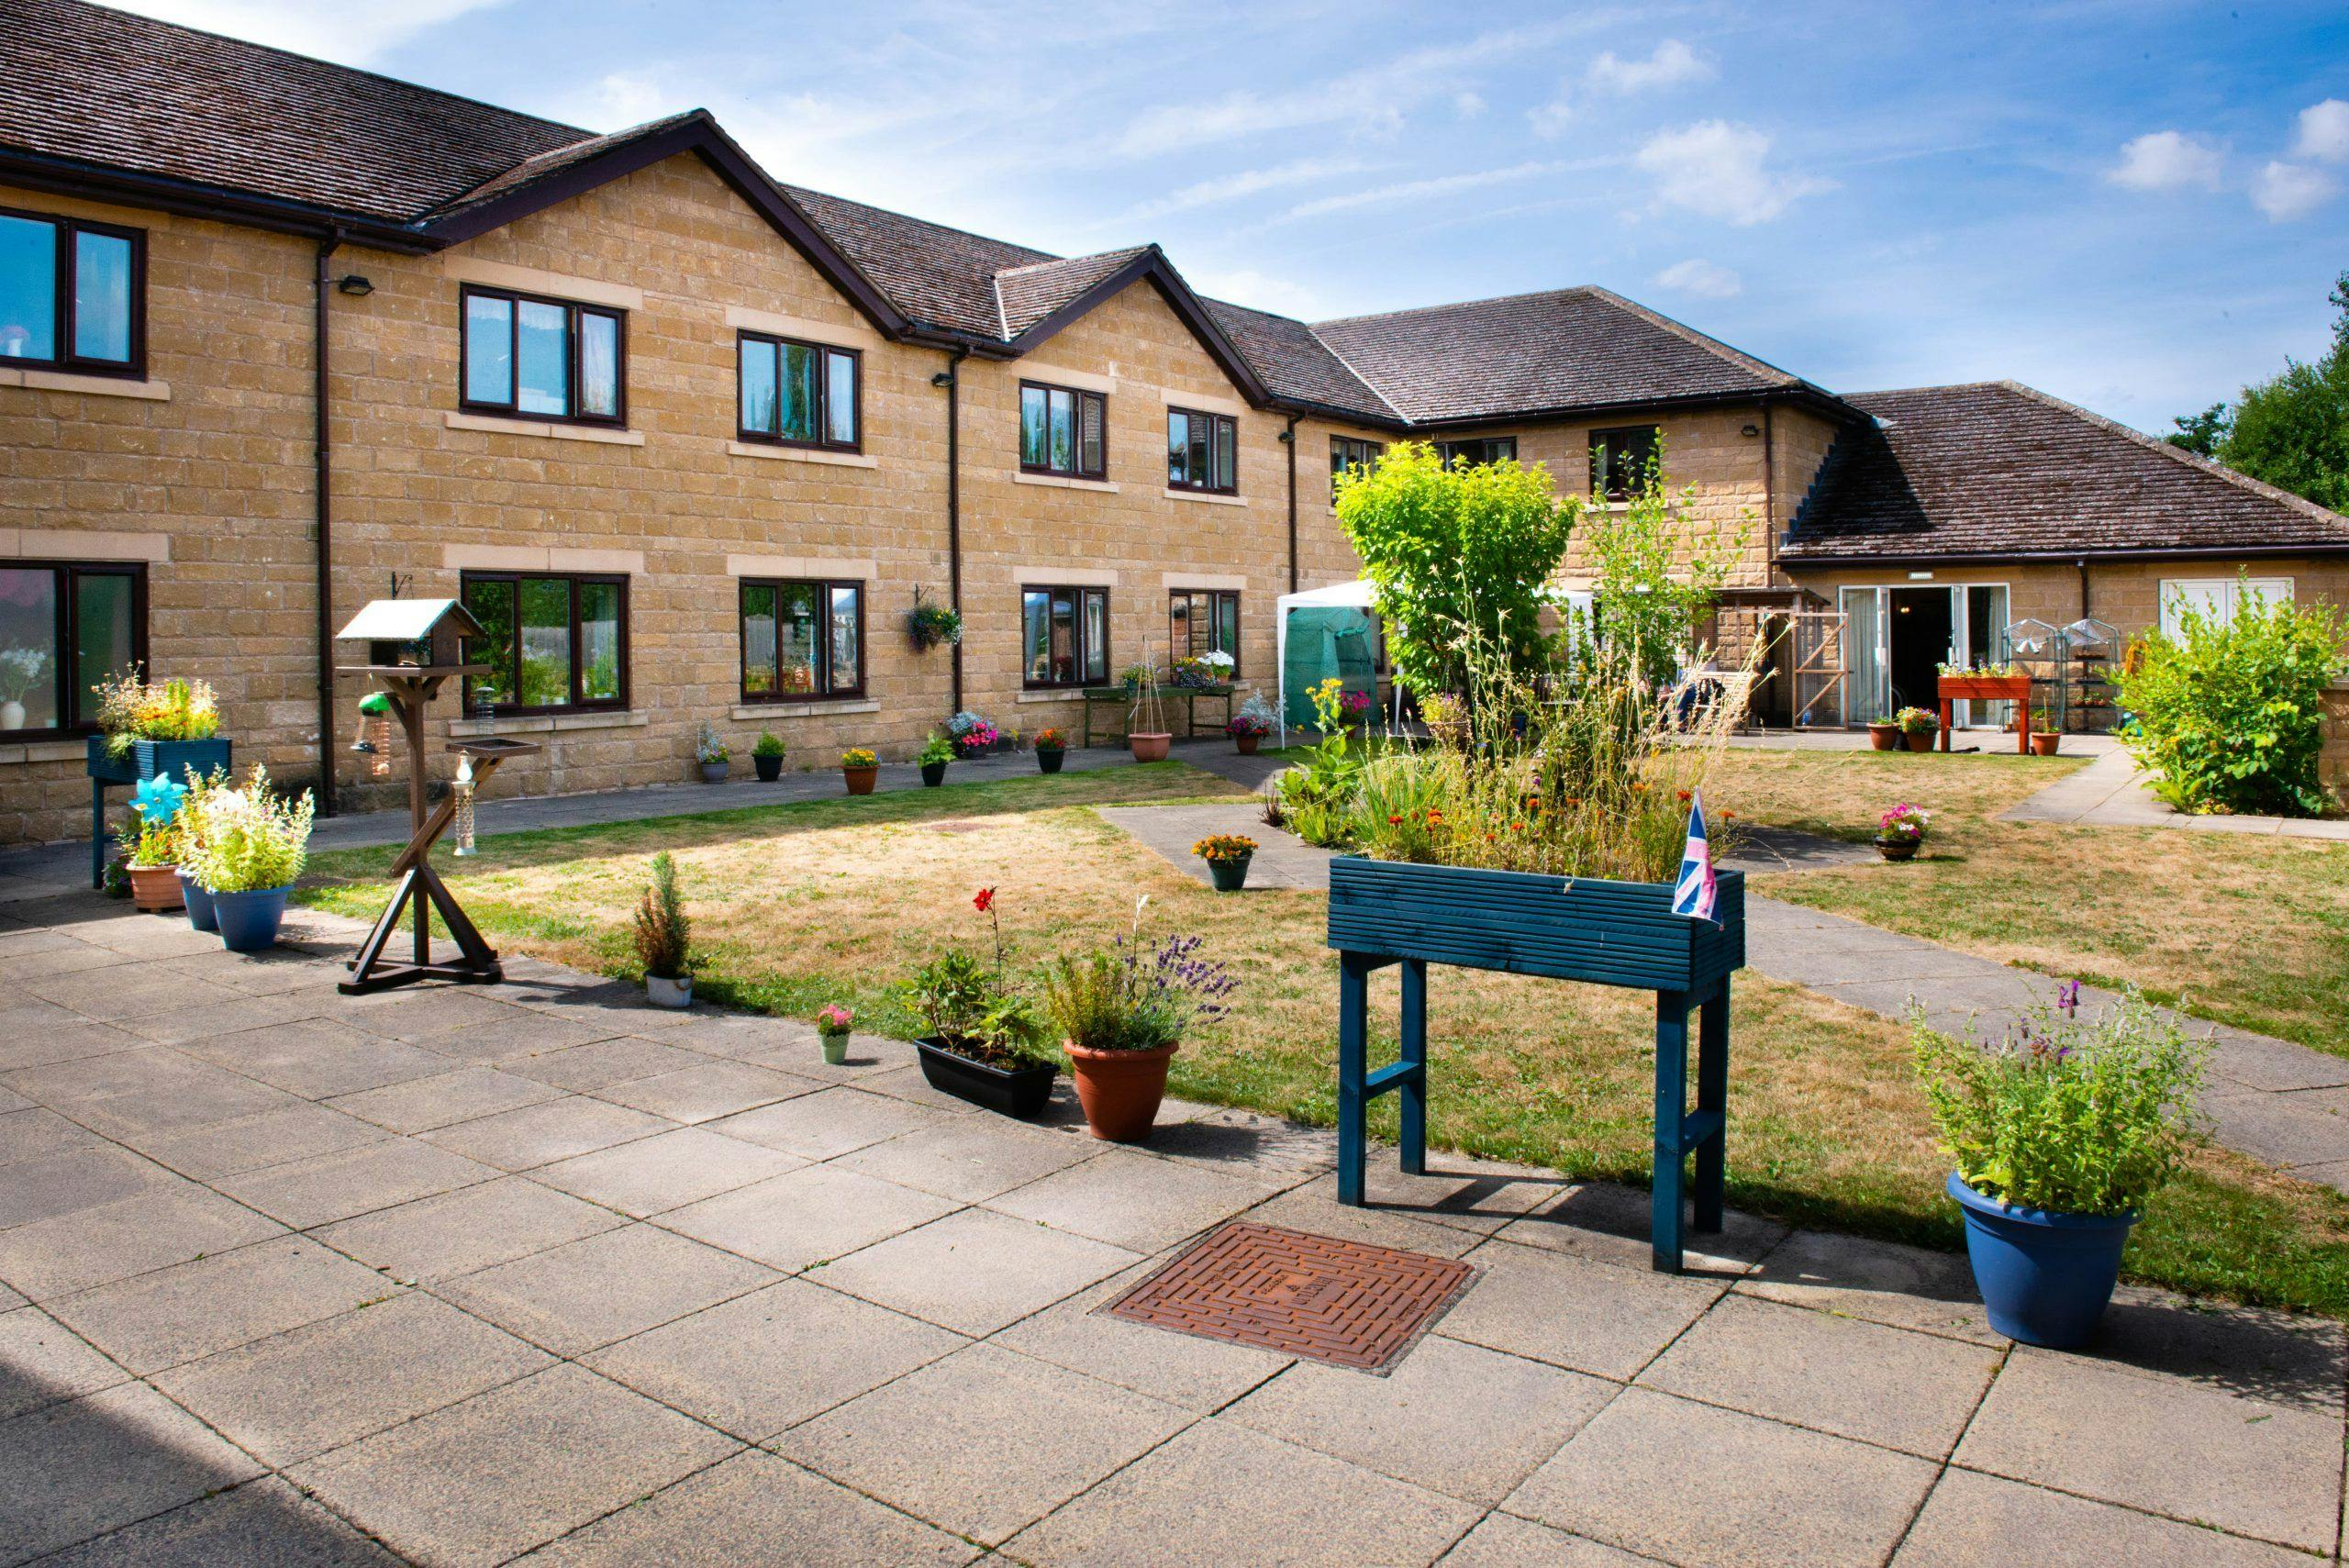 Exterior of Valley Lodge Care Home in Matlock, Derbyshire